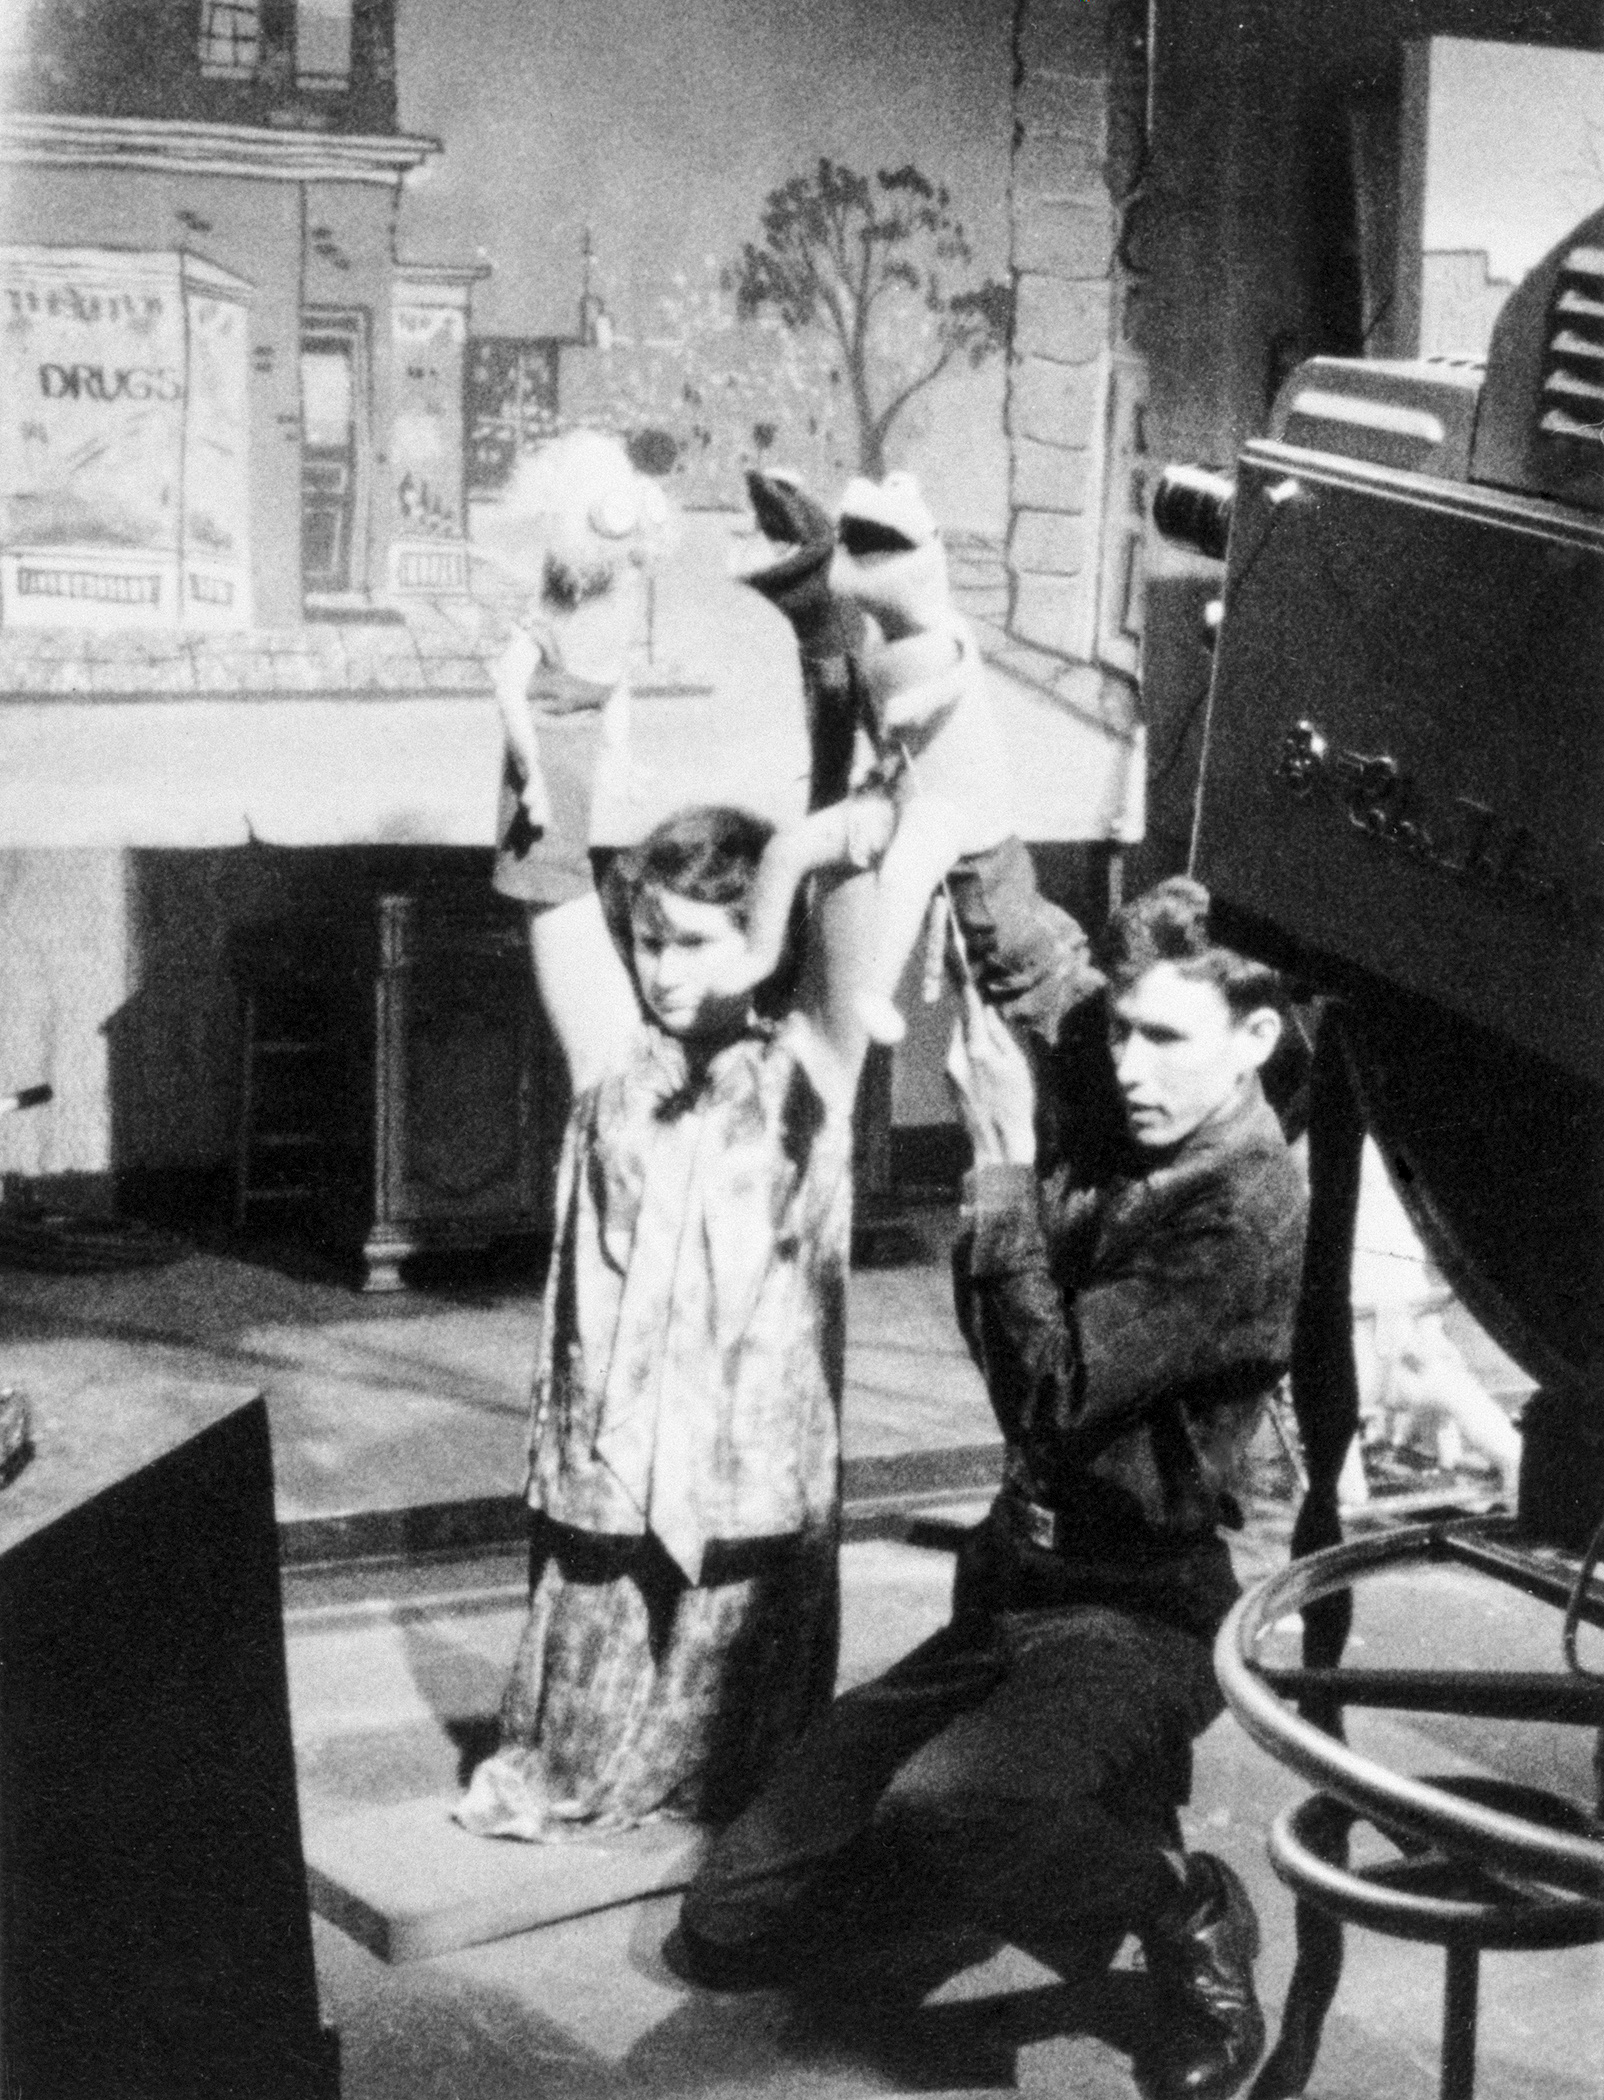 Jim and Jane Henson on their knees performing with their puppets in front of a television camera and television monitor on the set of “Sam and Friends.”